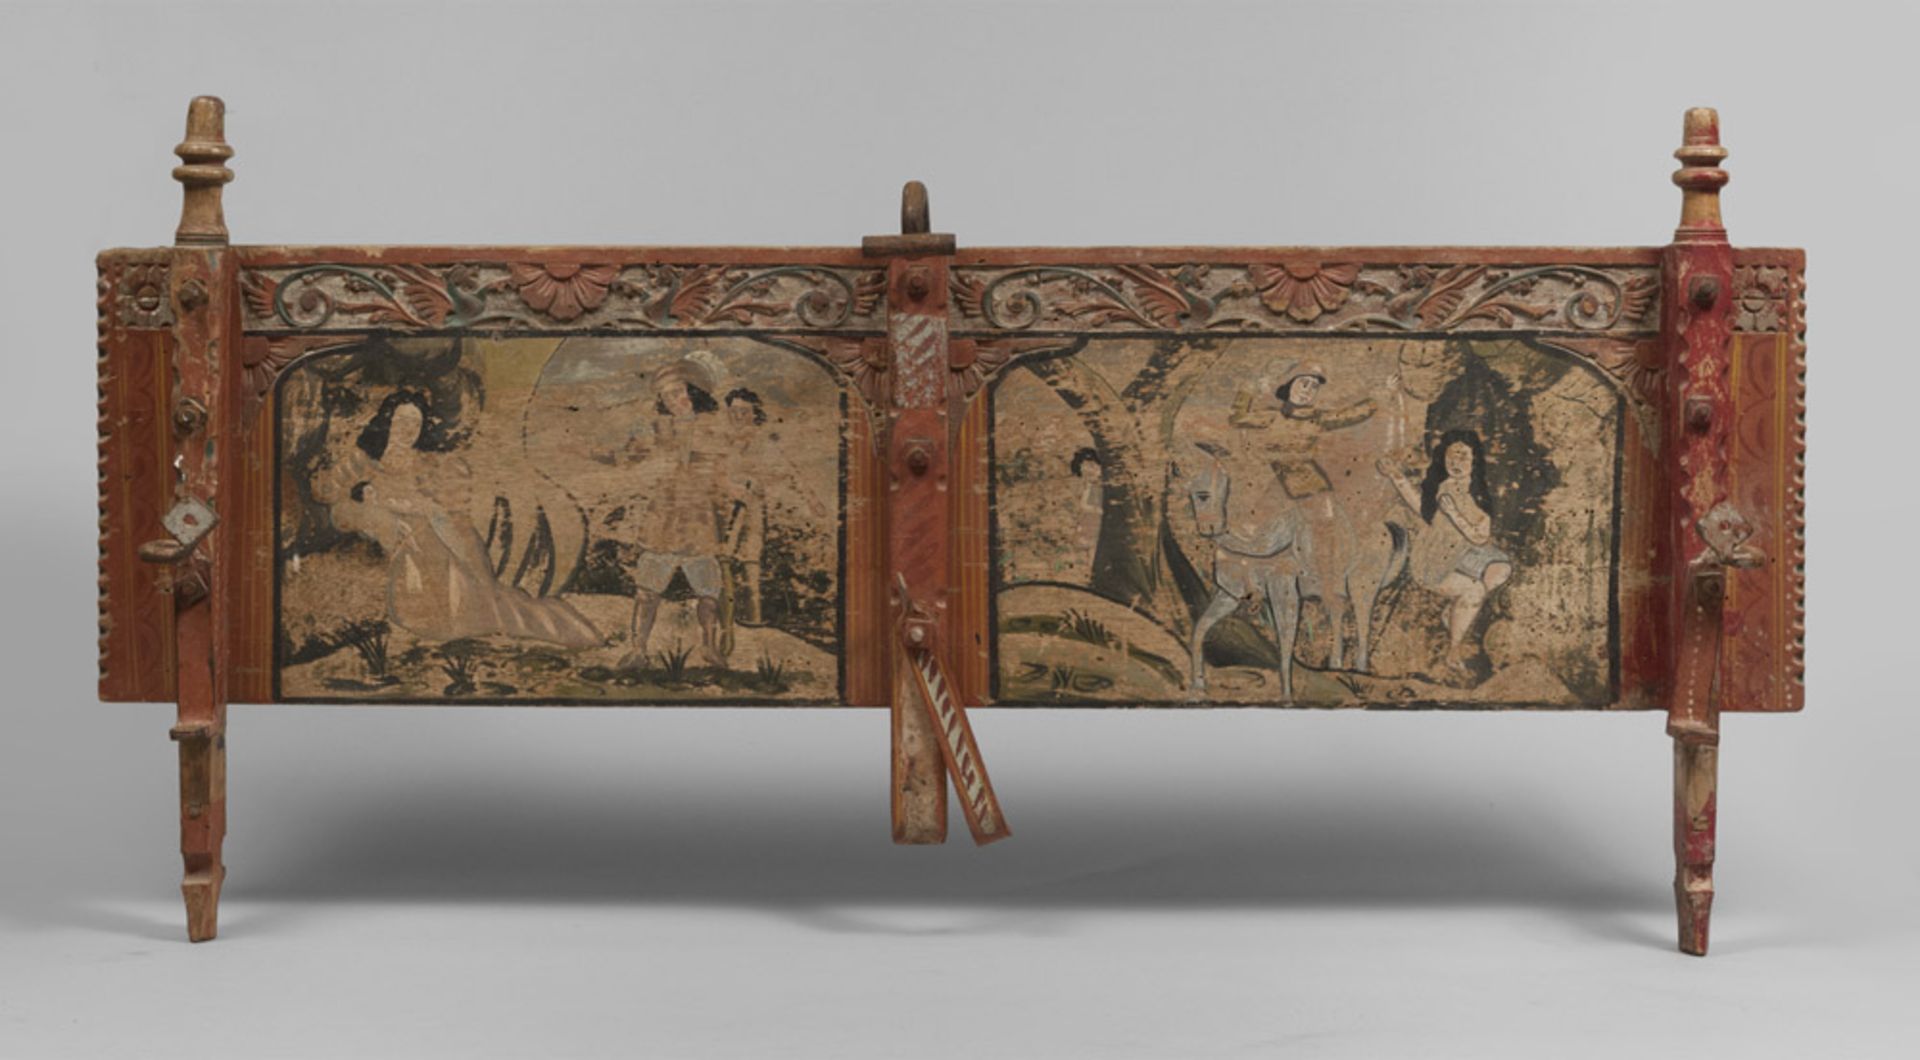 Wood lacquered bar of Sicilian wheelbarrow with iron finishes, 19th century. Measures cm. 56 x 111.